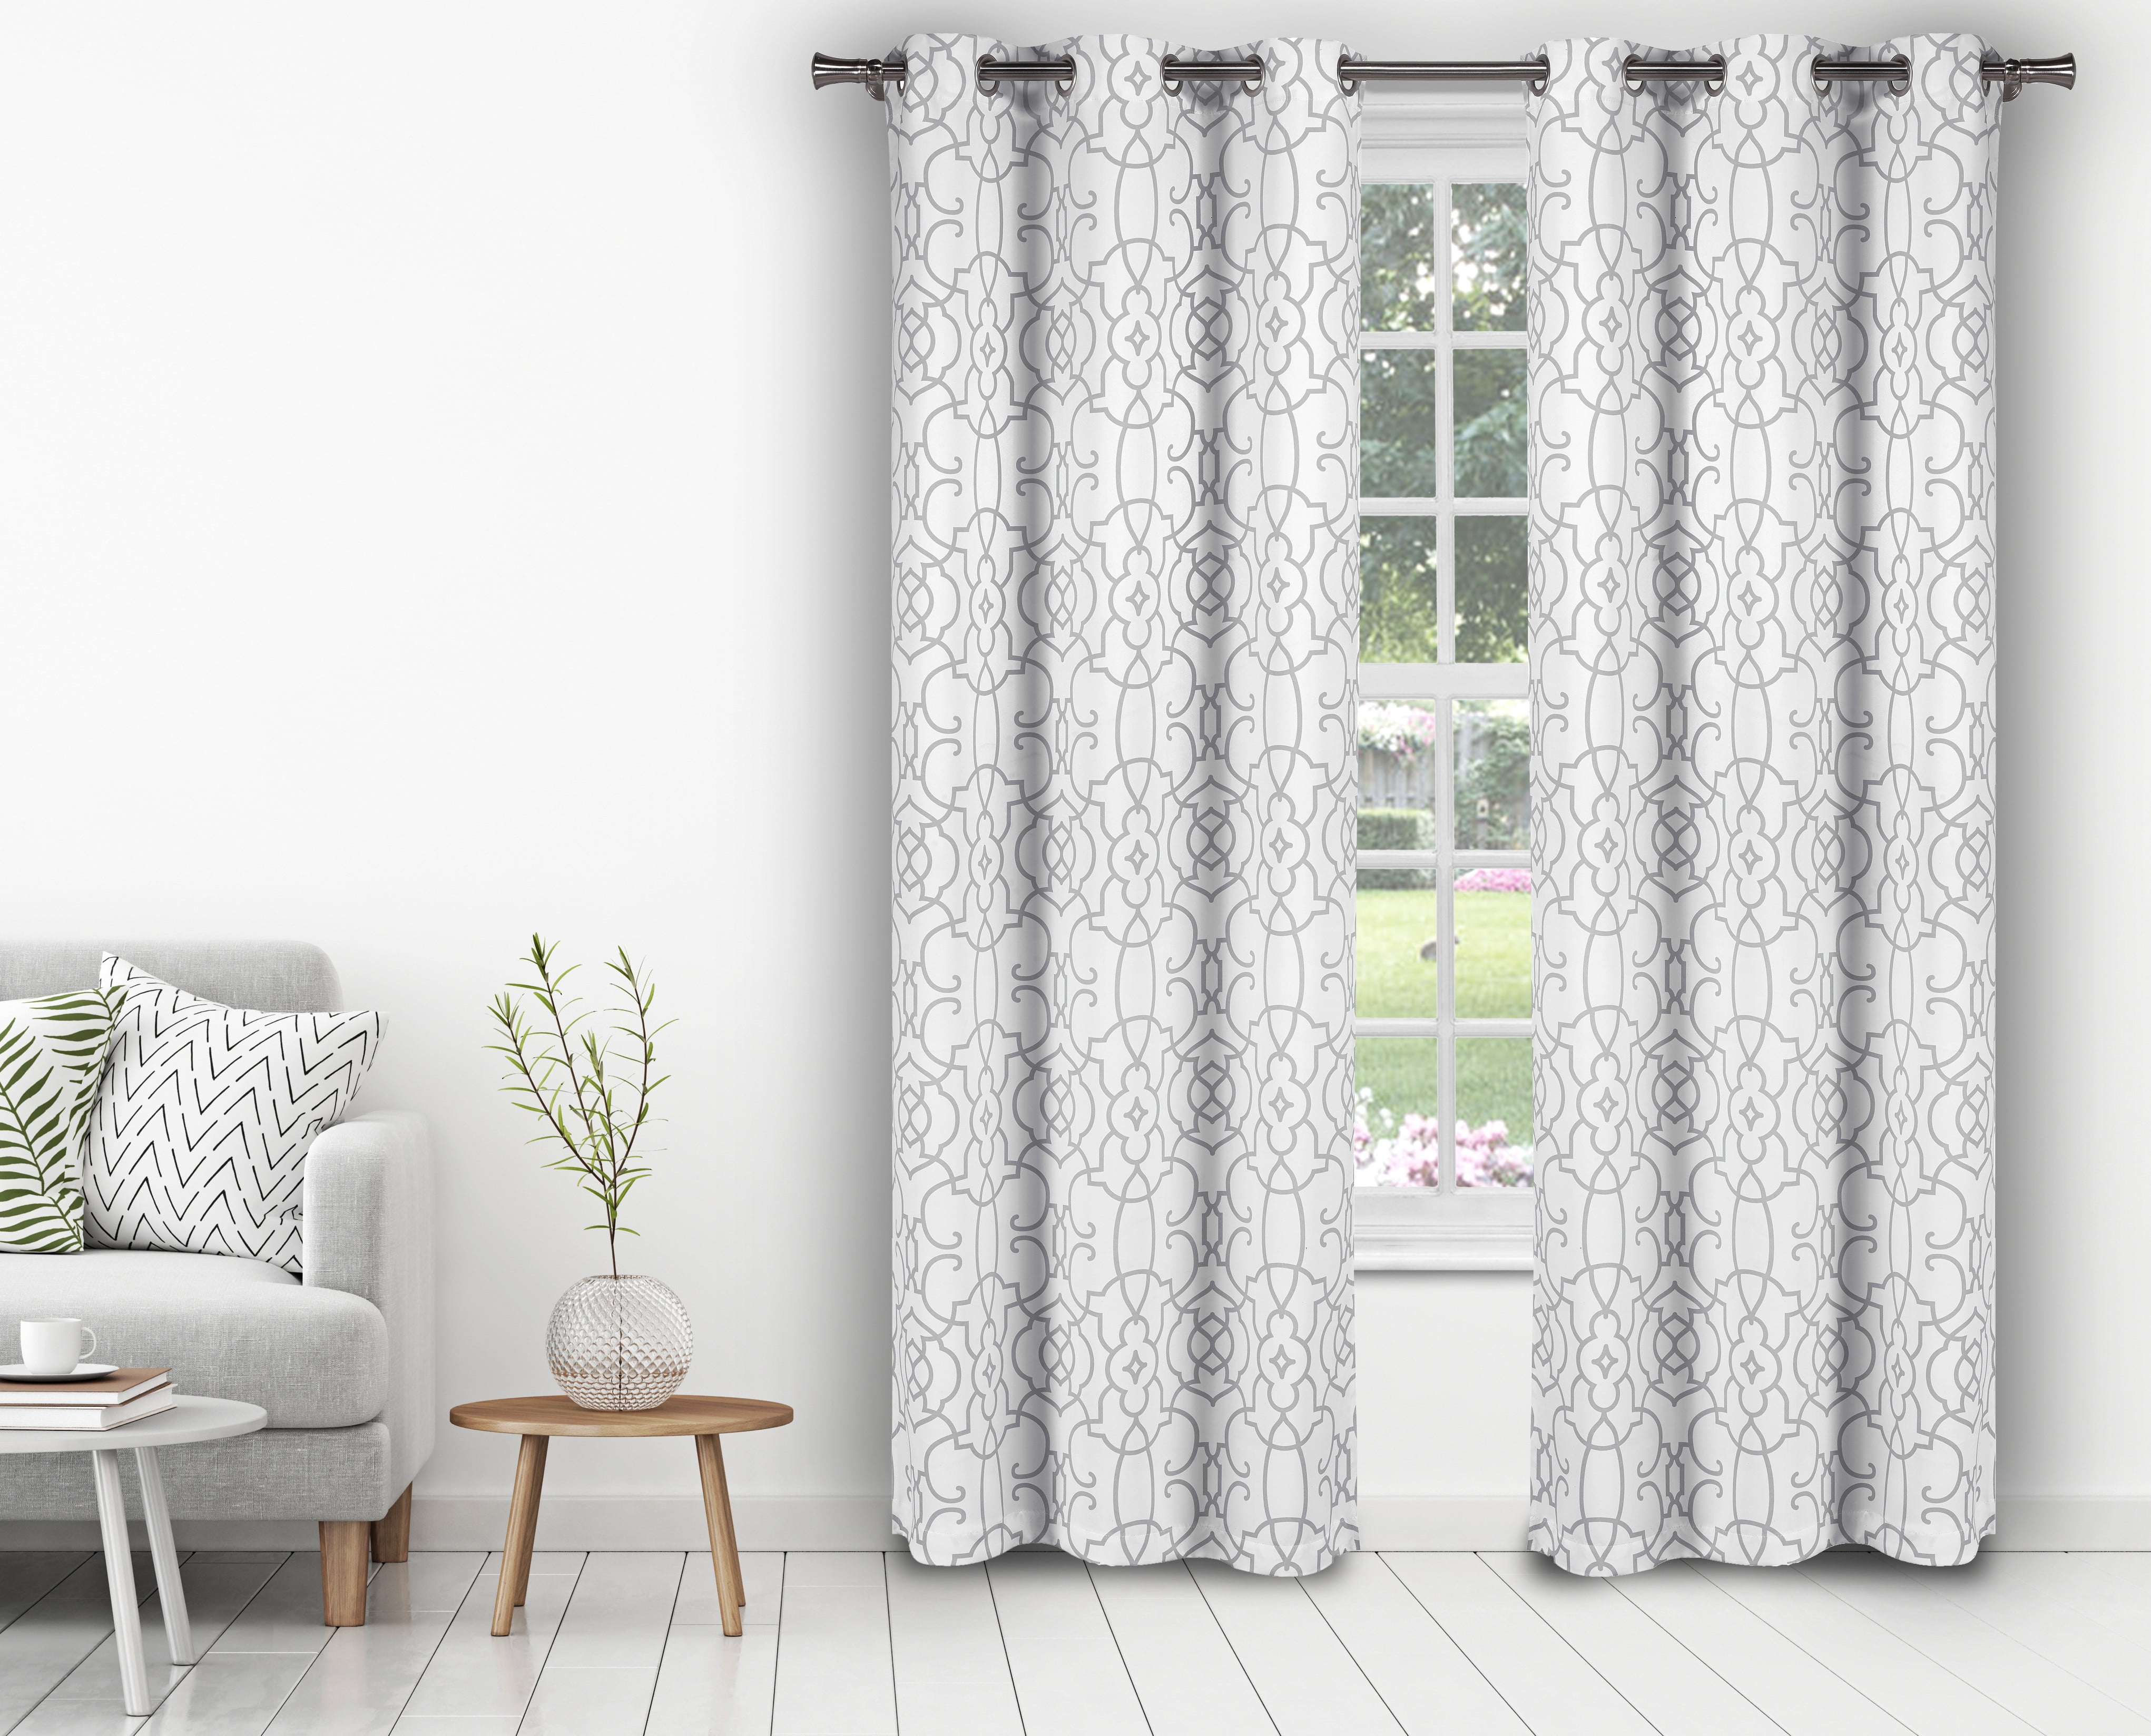 Blackout Curtains For Living Room Walmart